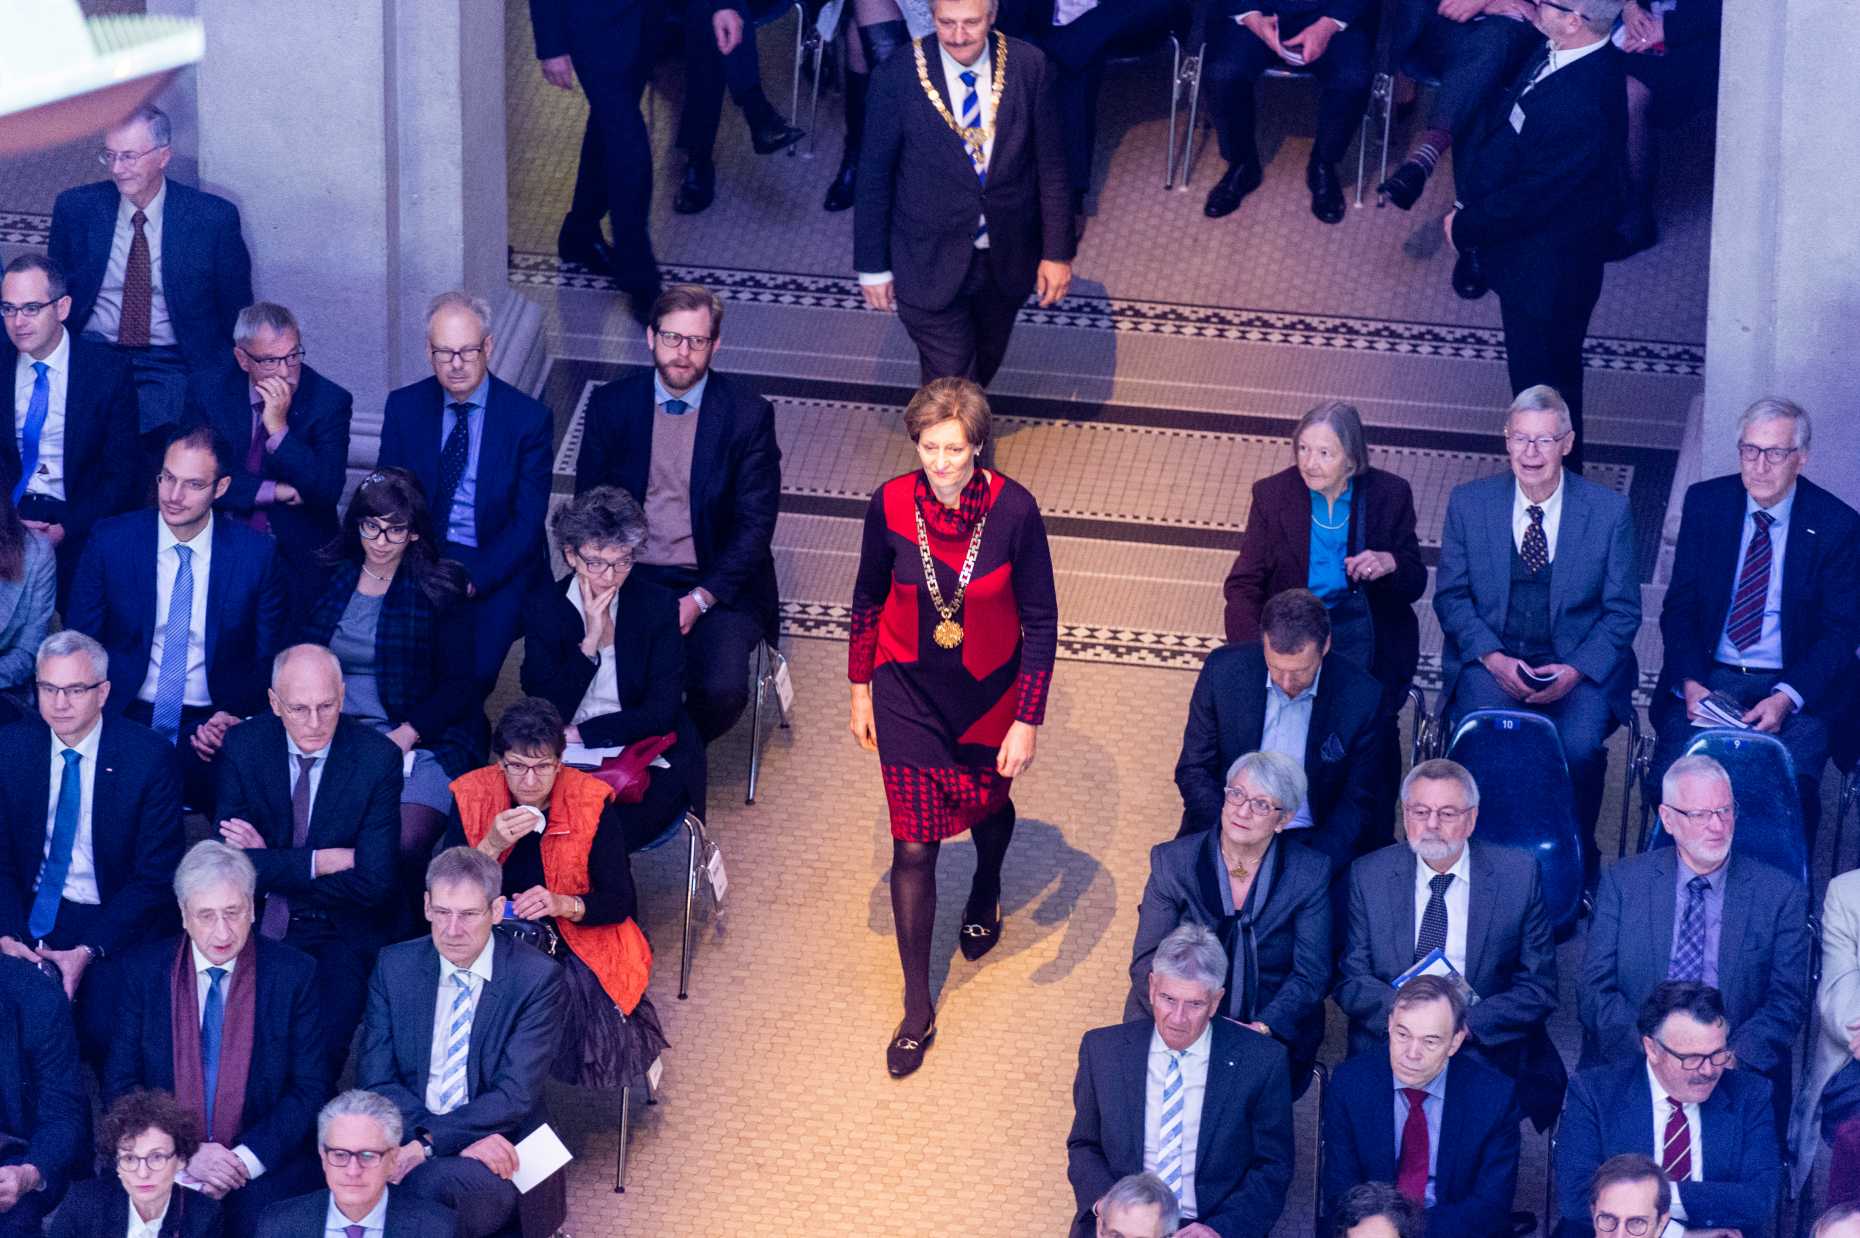 ETH Rector Sarah Springman during the opening ceremony of ETH Day 2018. (Image: ETH Zurich / Oliver Bartenschlager)